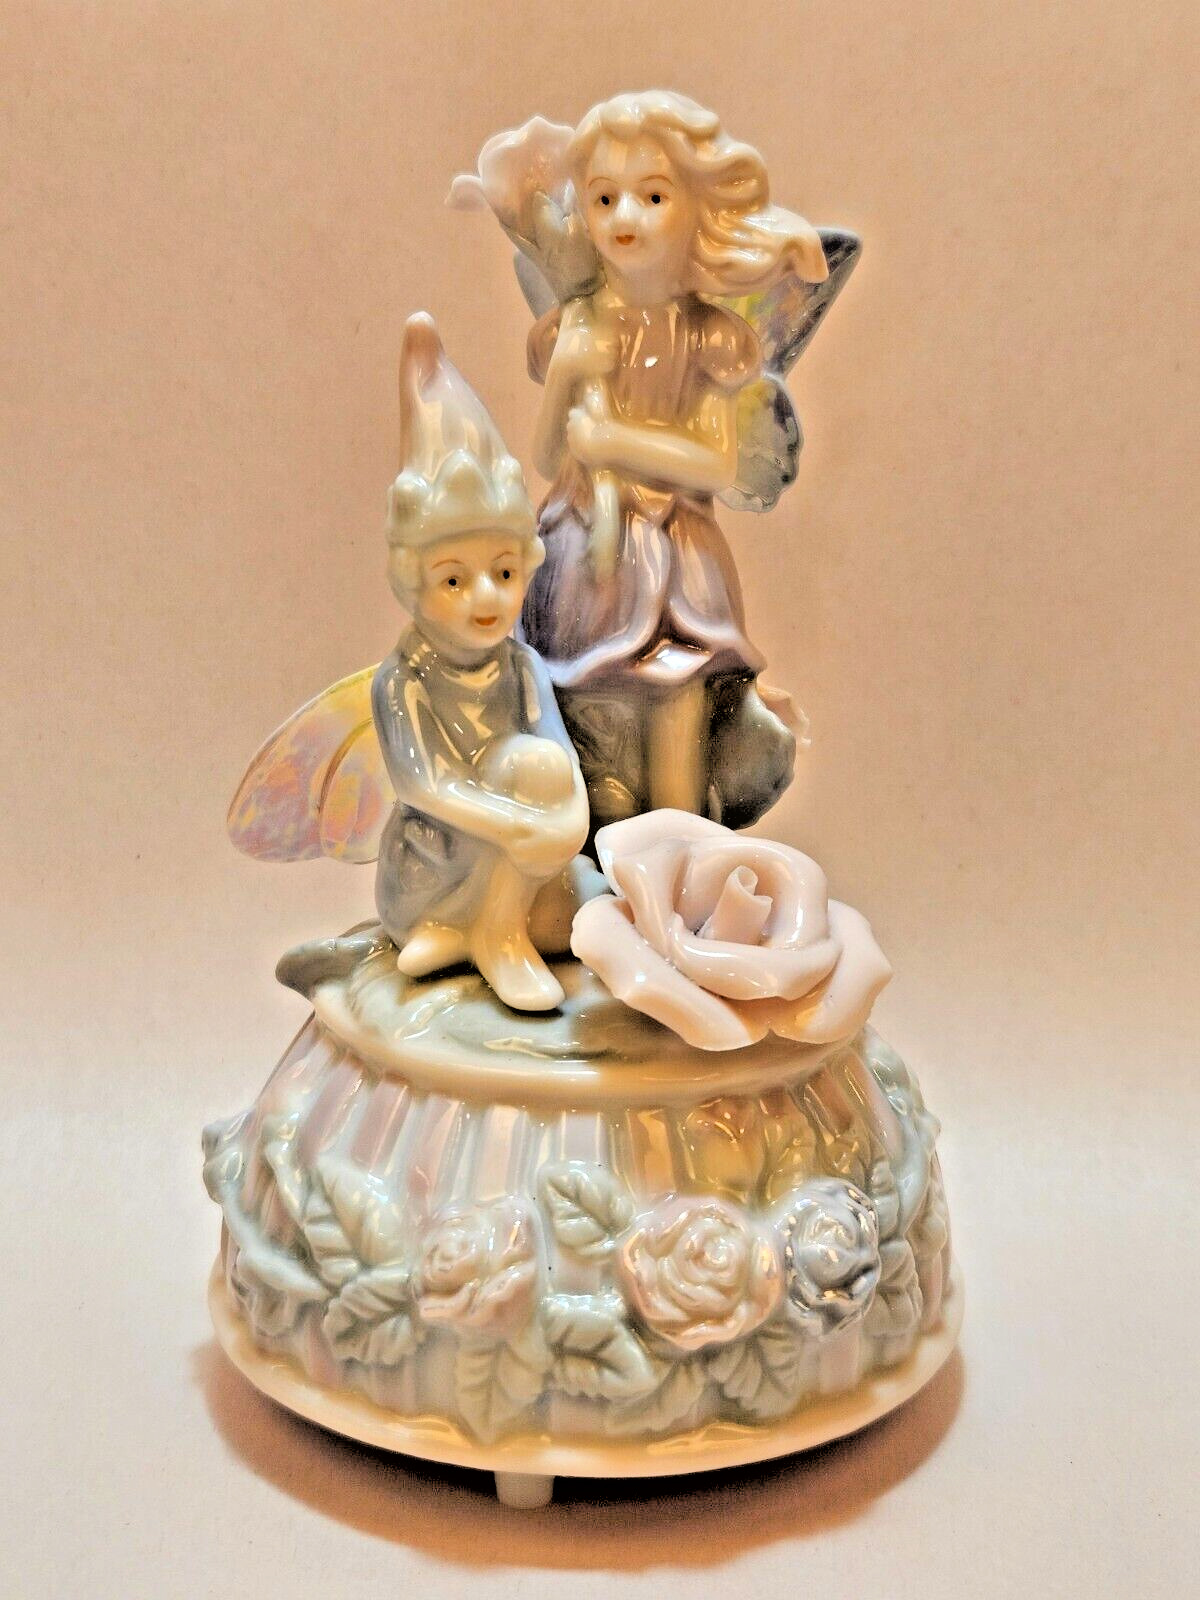 NWB Simson Giftware Porcelain Fairy and Roses Musical Figurine 5-1/4